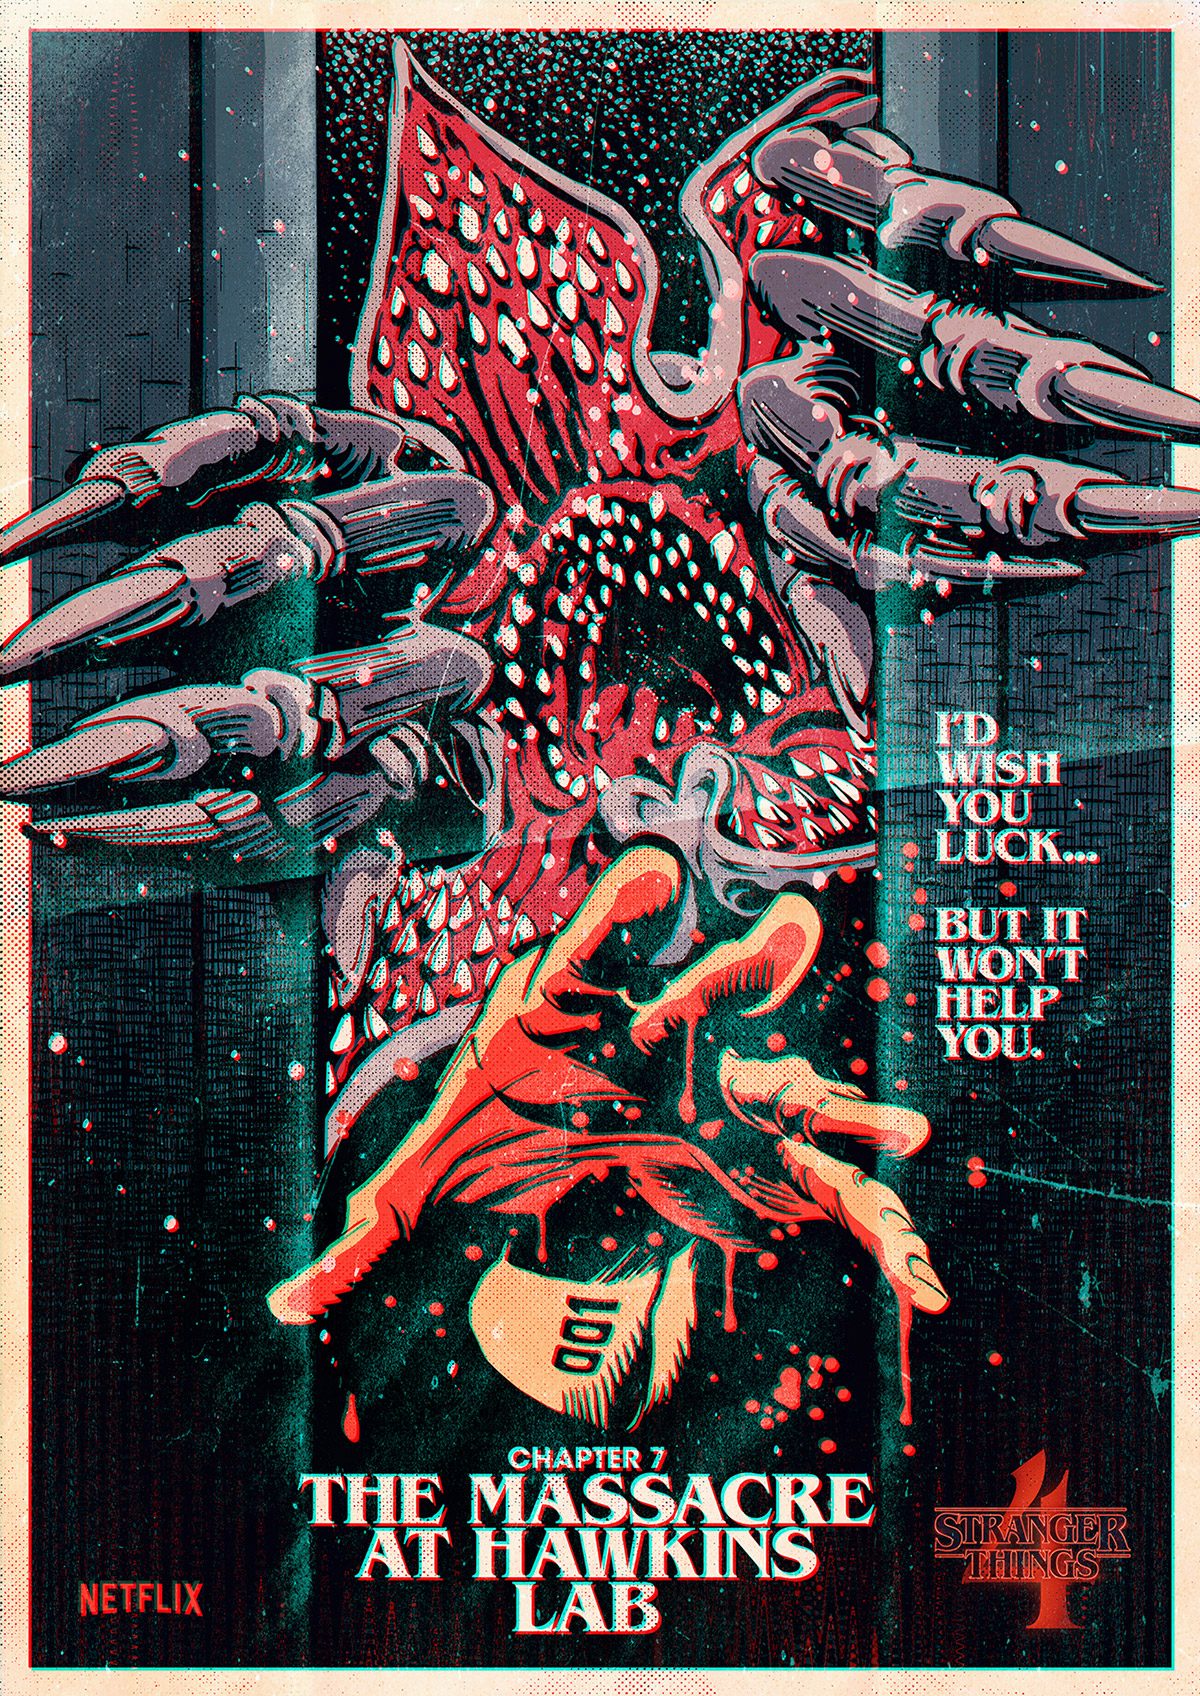 Stranger Things poster by Butcher Billy